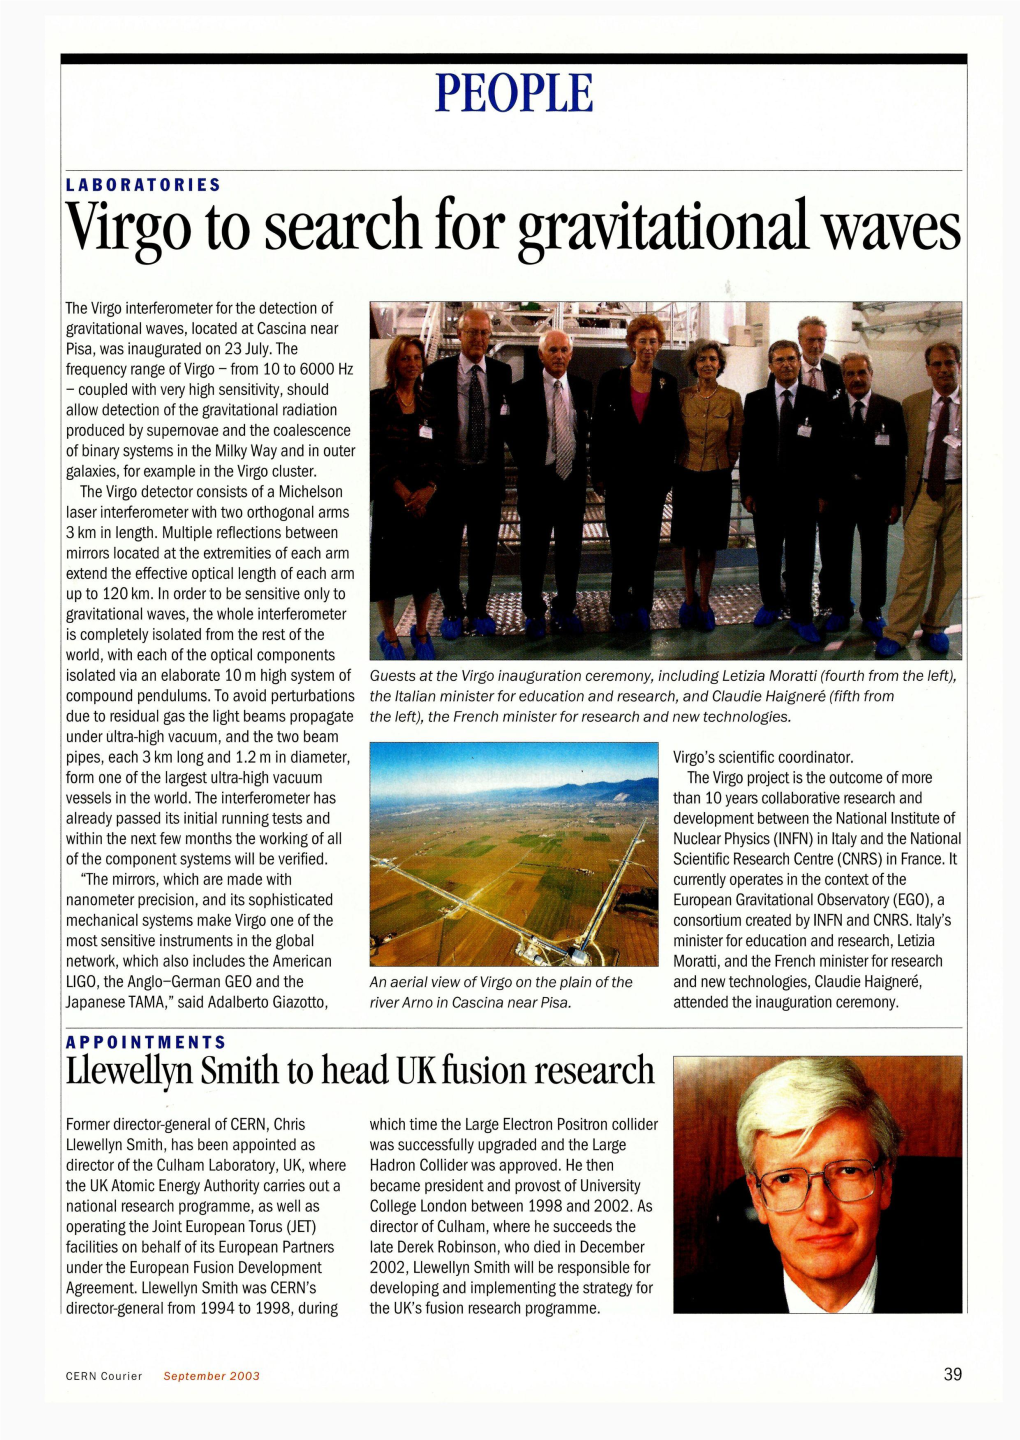 Virgo to Search for Gravitational Waves